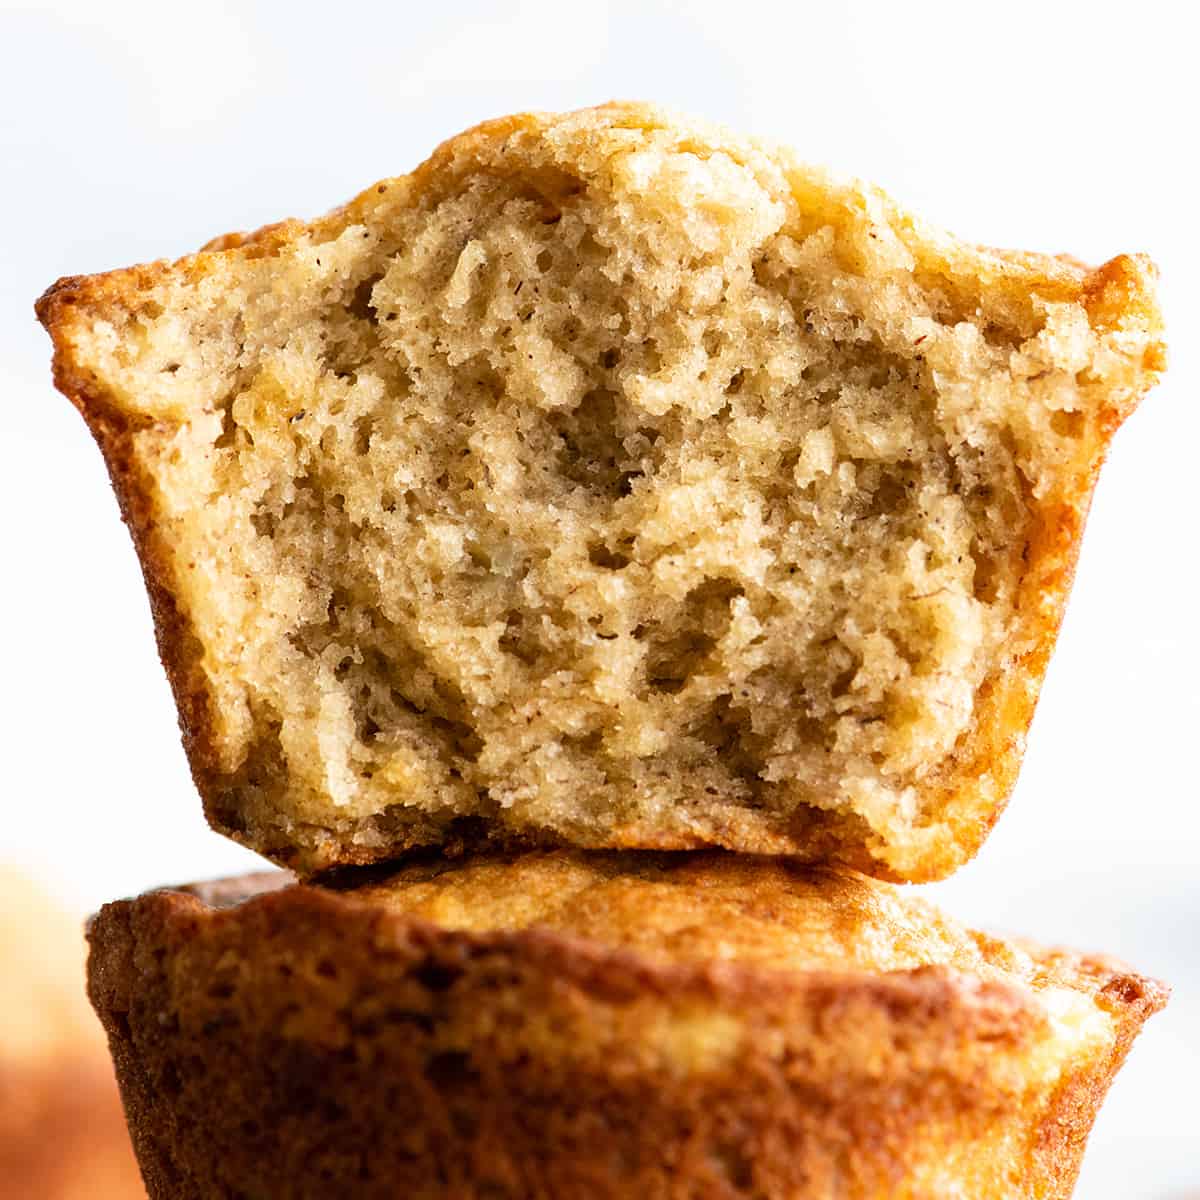 up close view of the inside of a banana muffin cut in half